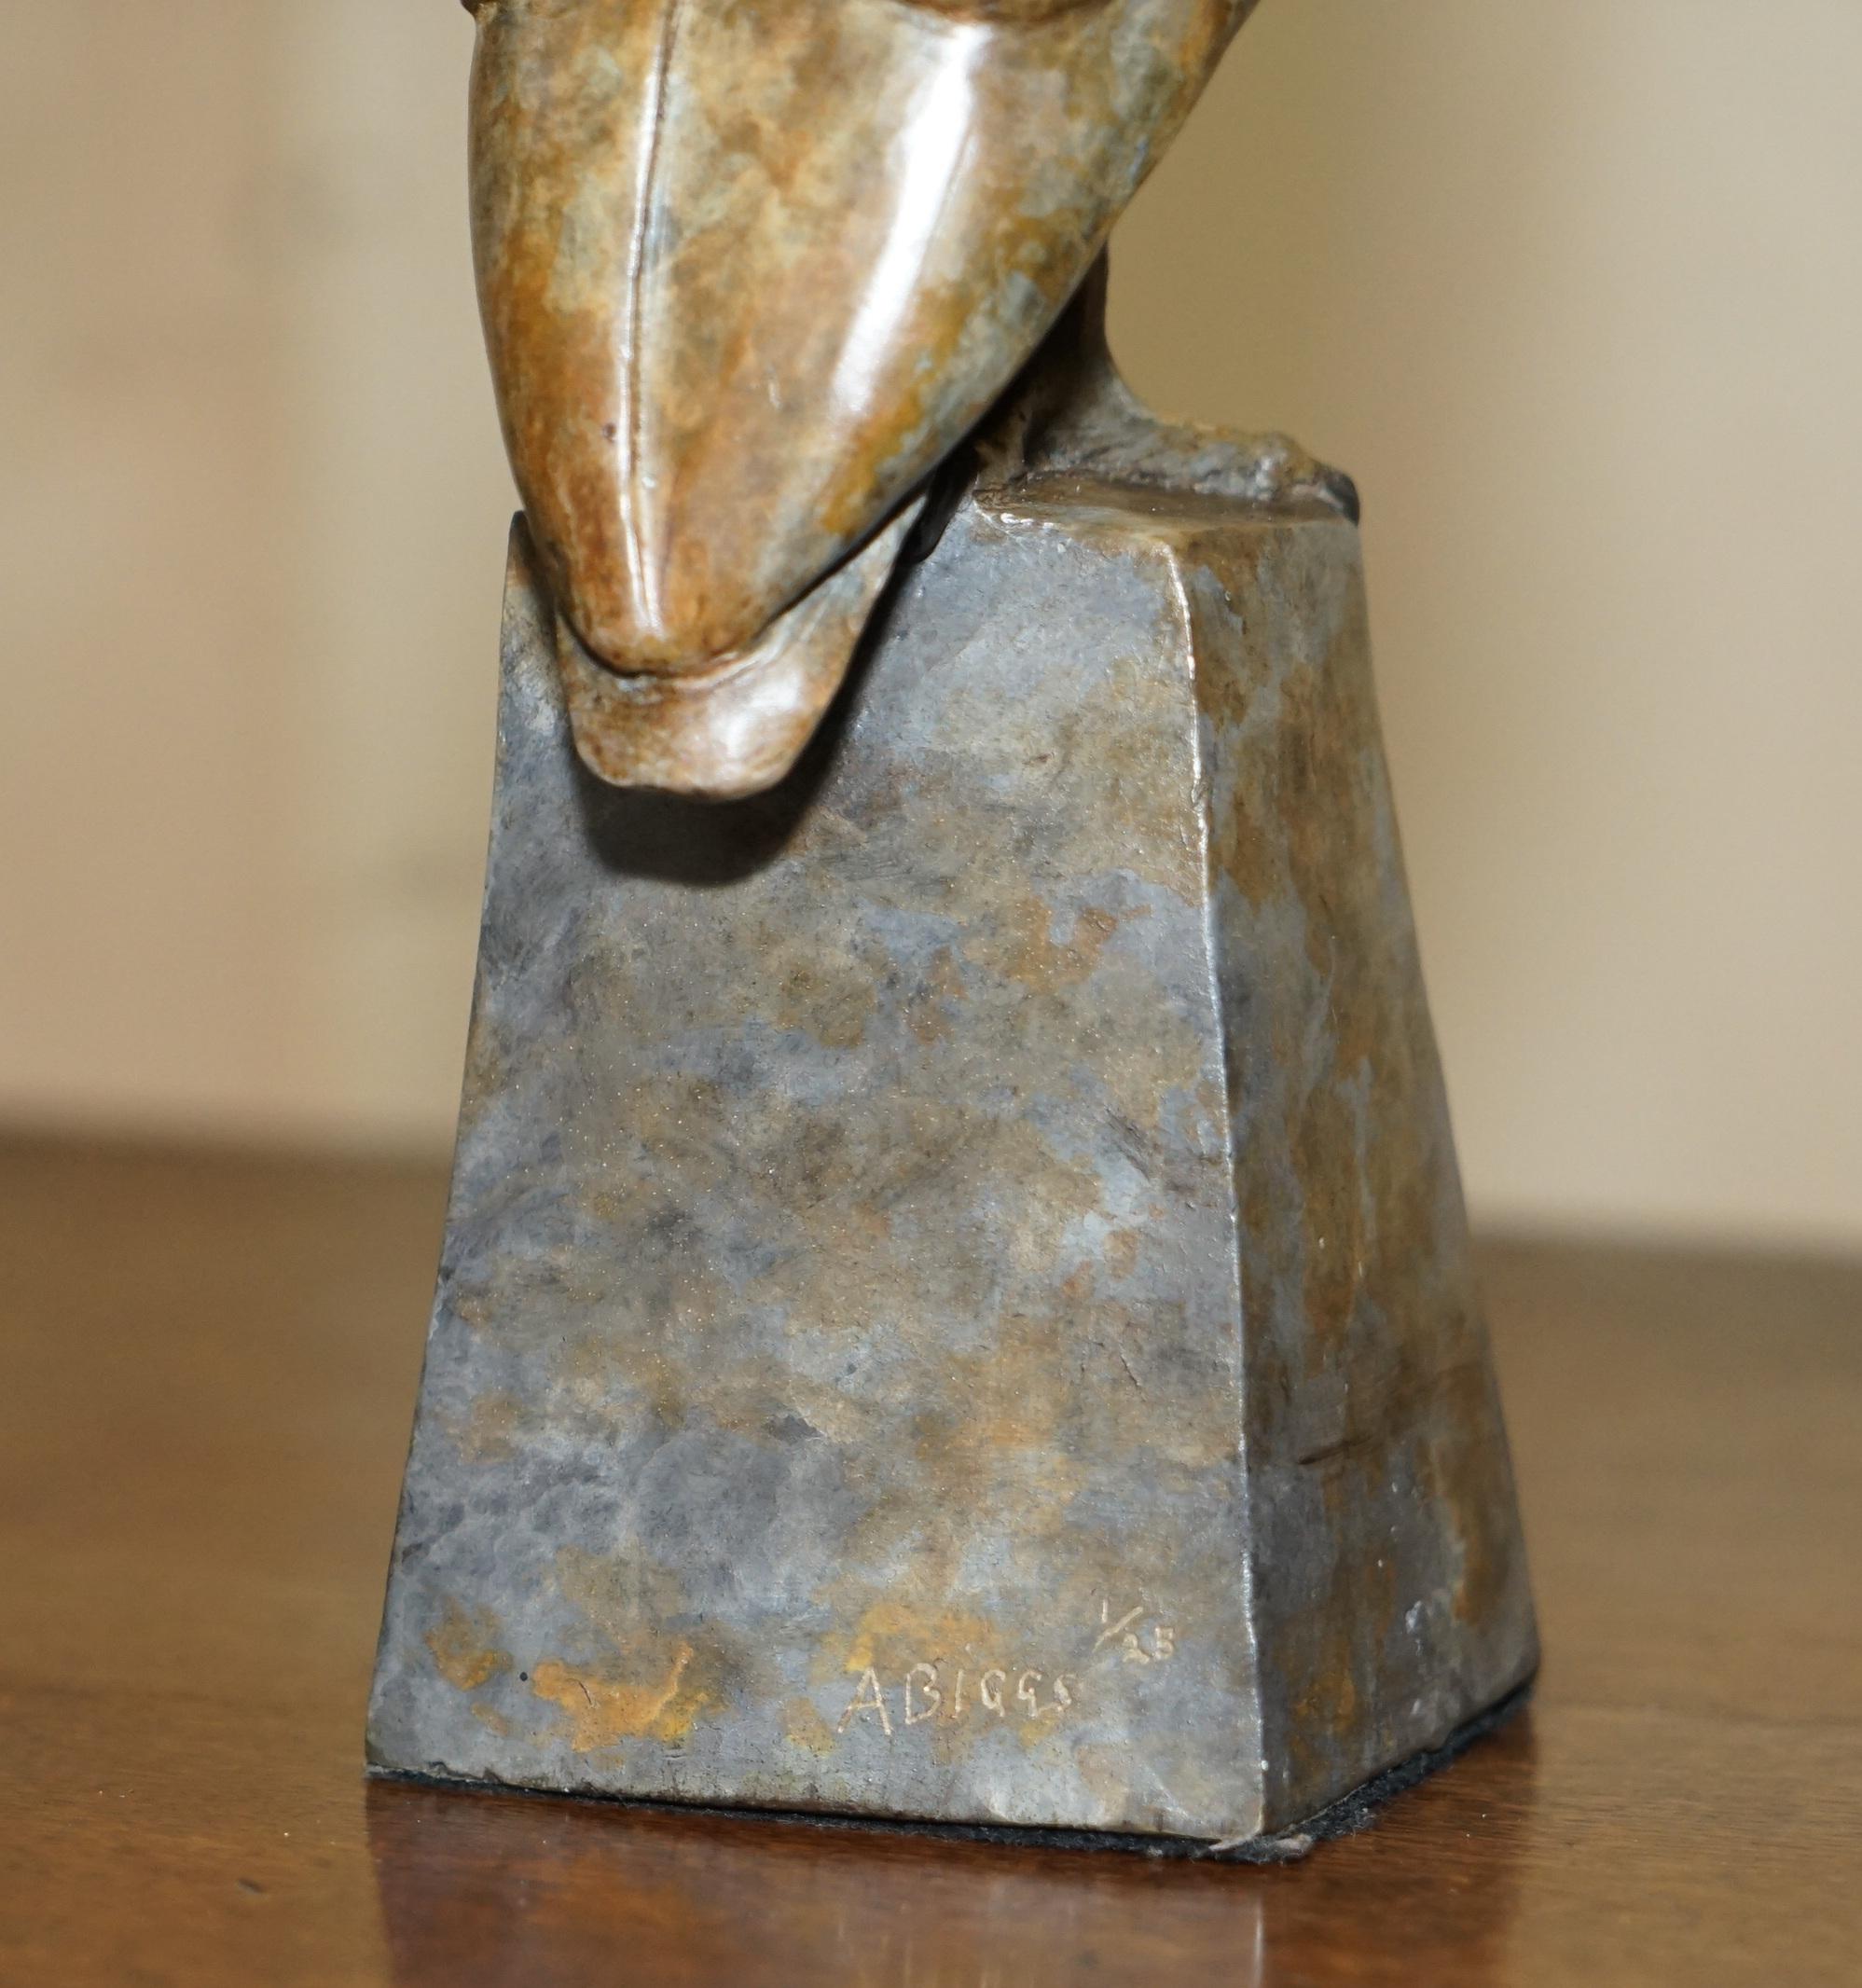 Exquisite 1/25 Limited Edition Alan Biggs Solid Bronze Owl Signed and Numbered For Sale 5